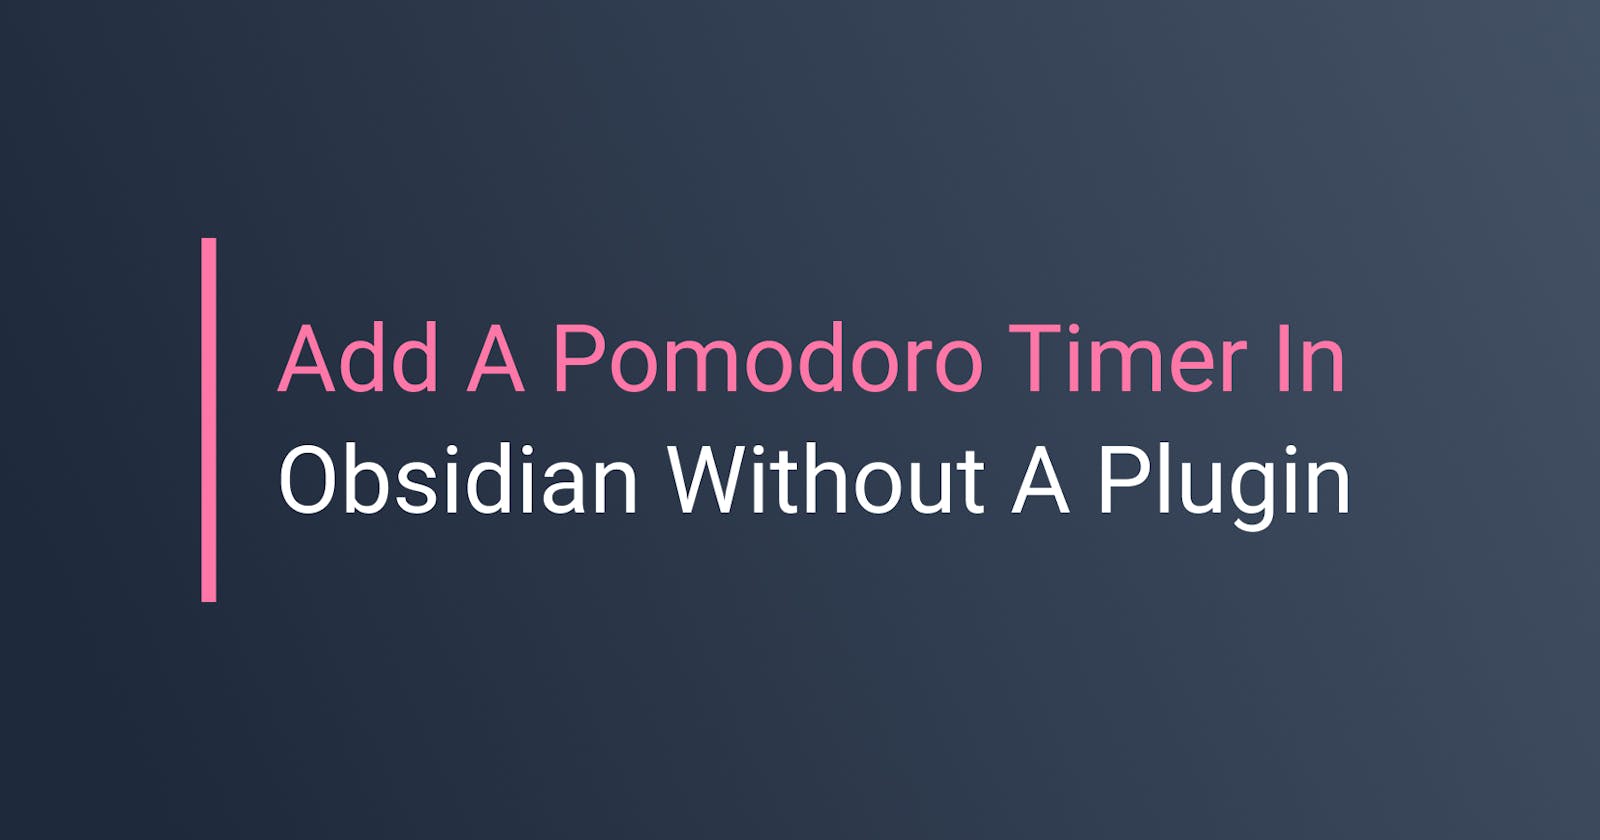 How To Add A Pomodoro Timer In Obsidian Without A Plugin